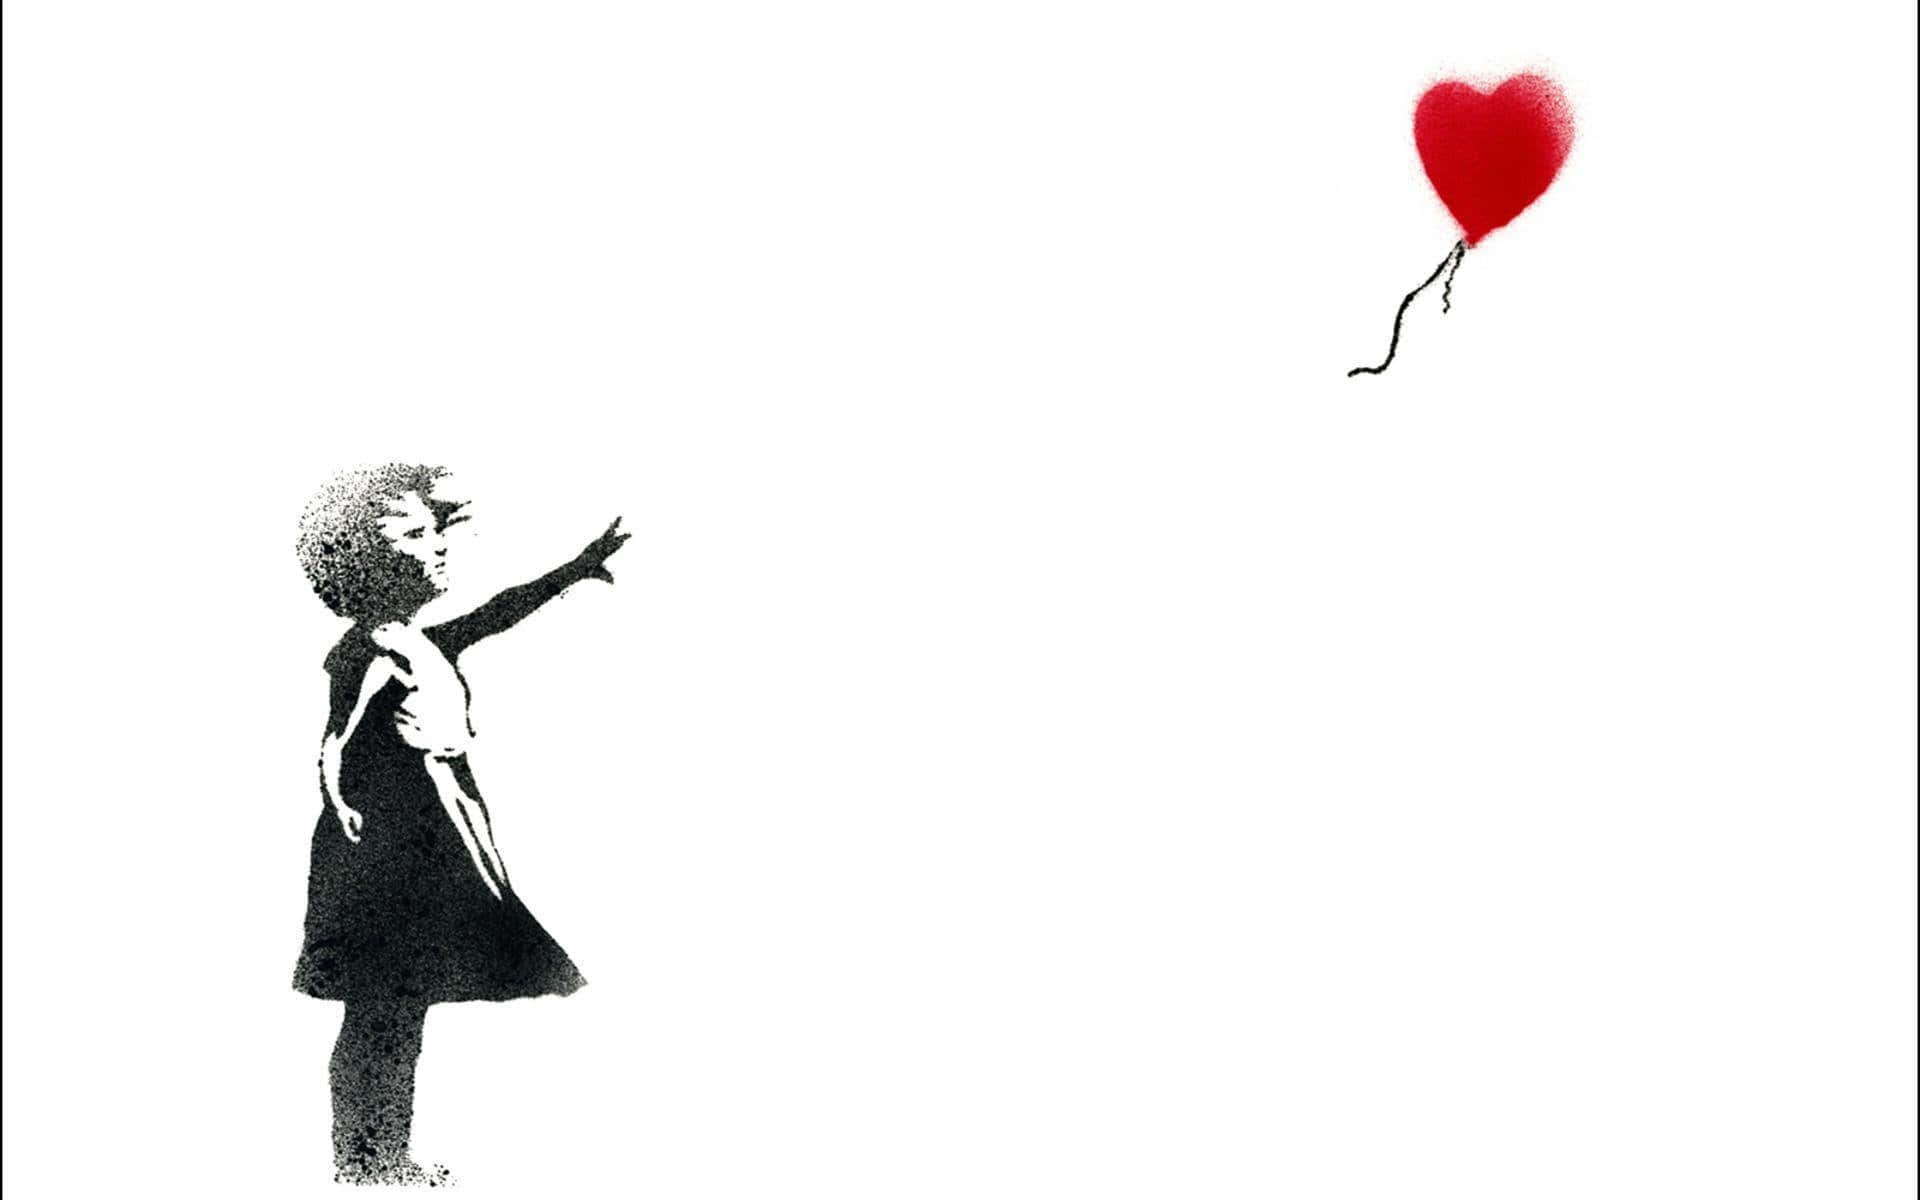 Banksy's iconic "The Street is in Play" mural